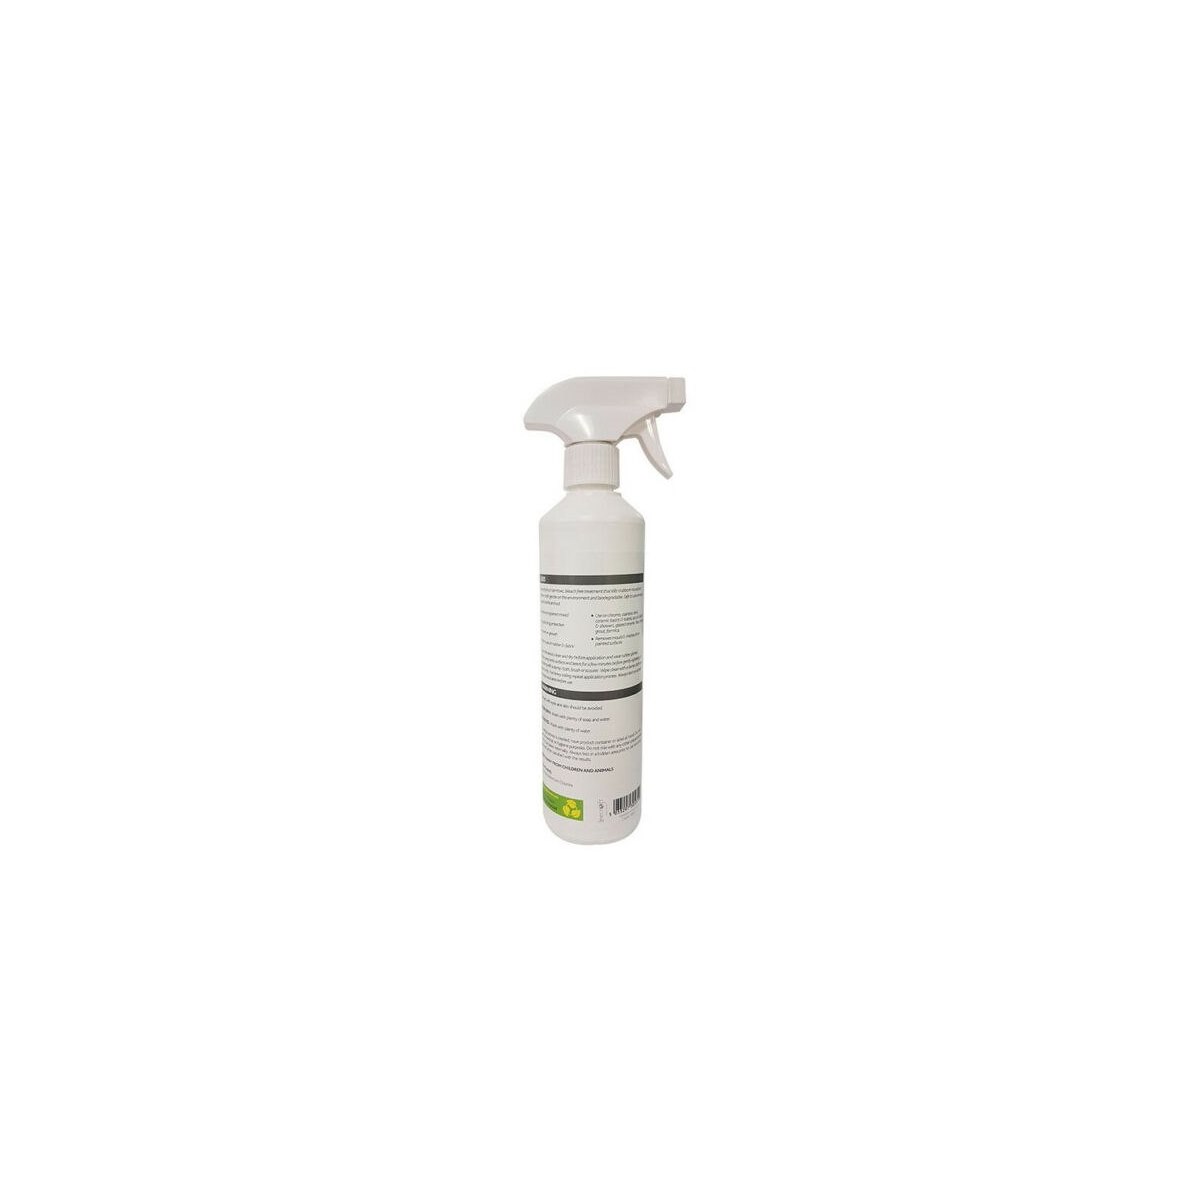 Wilsons Mould and Mildew Remover Spray